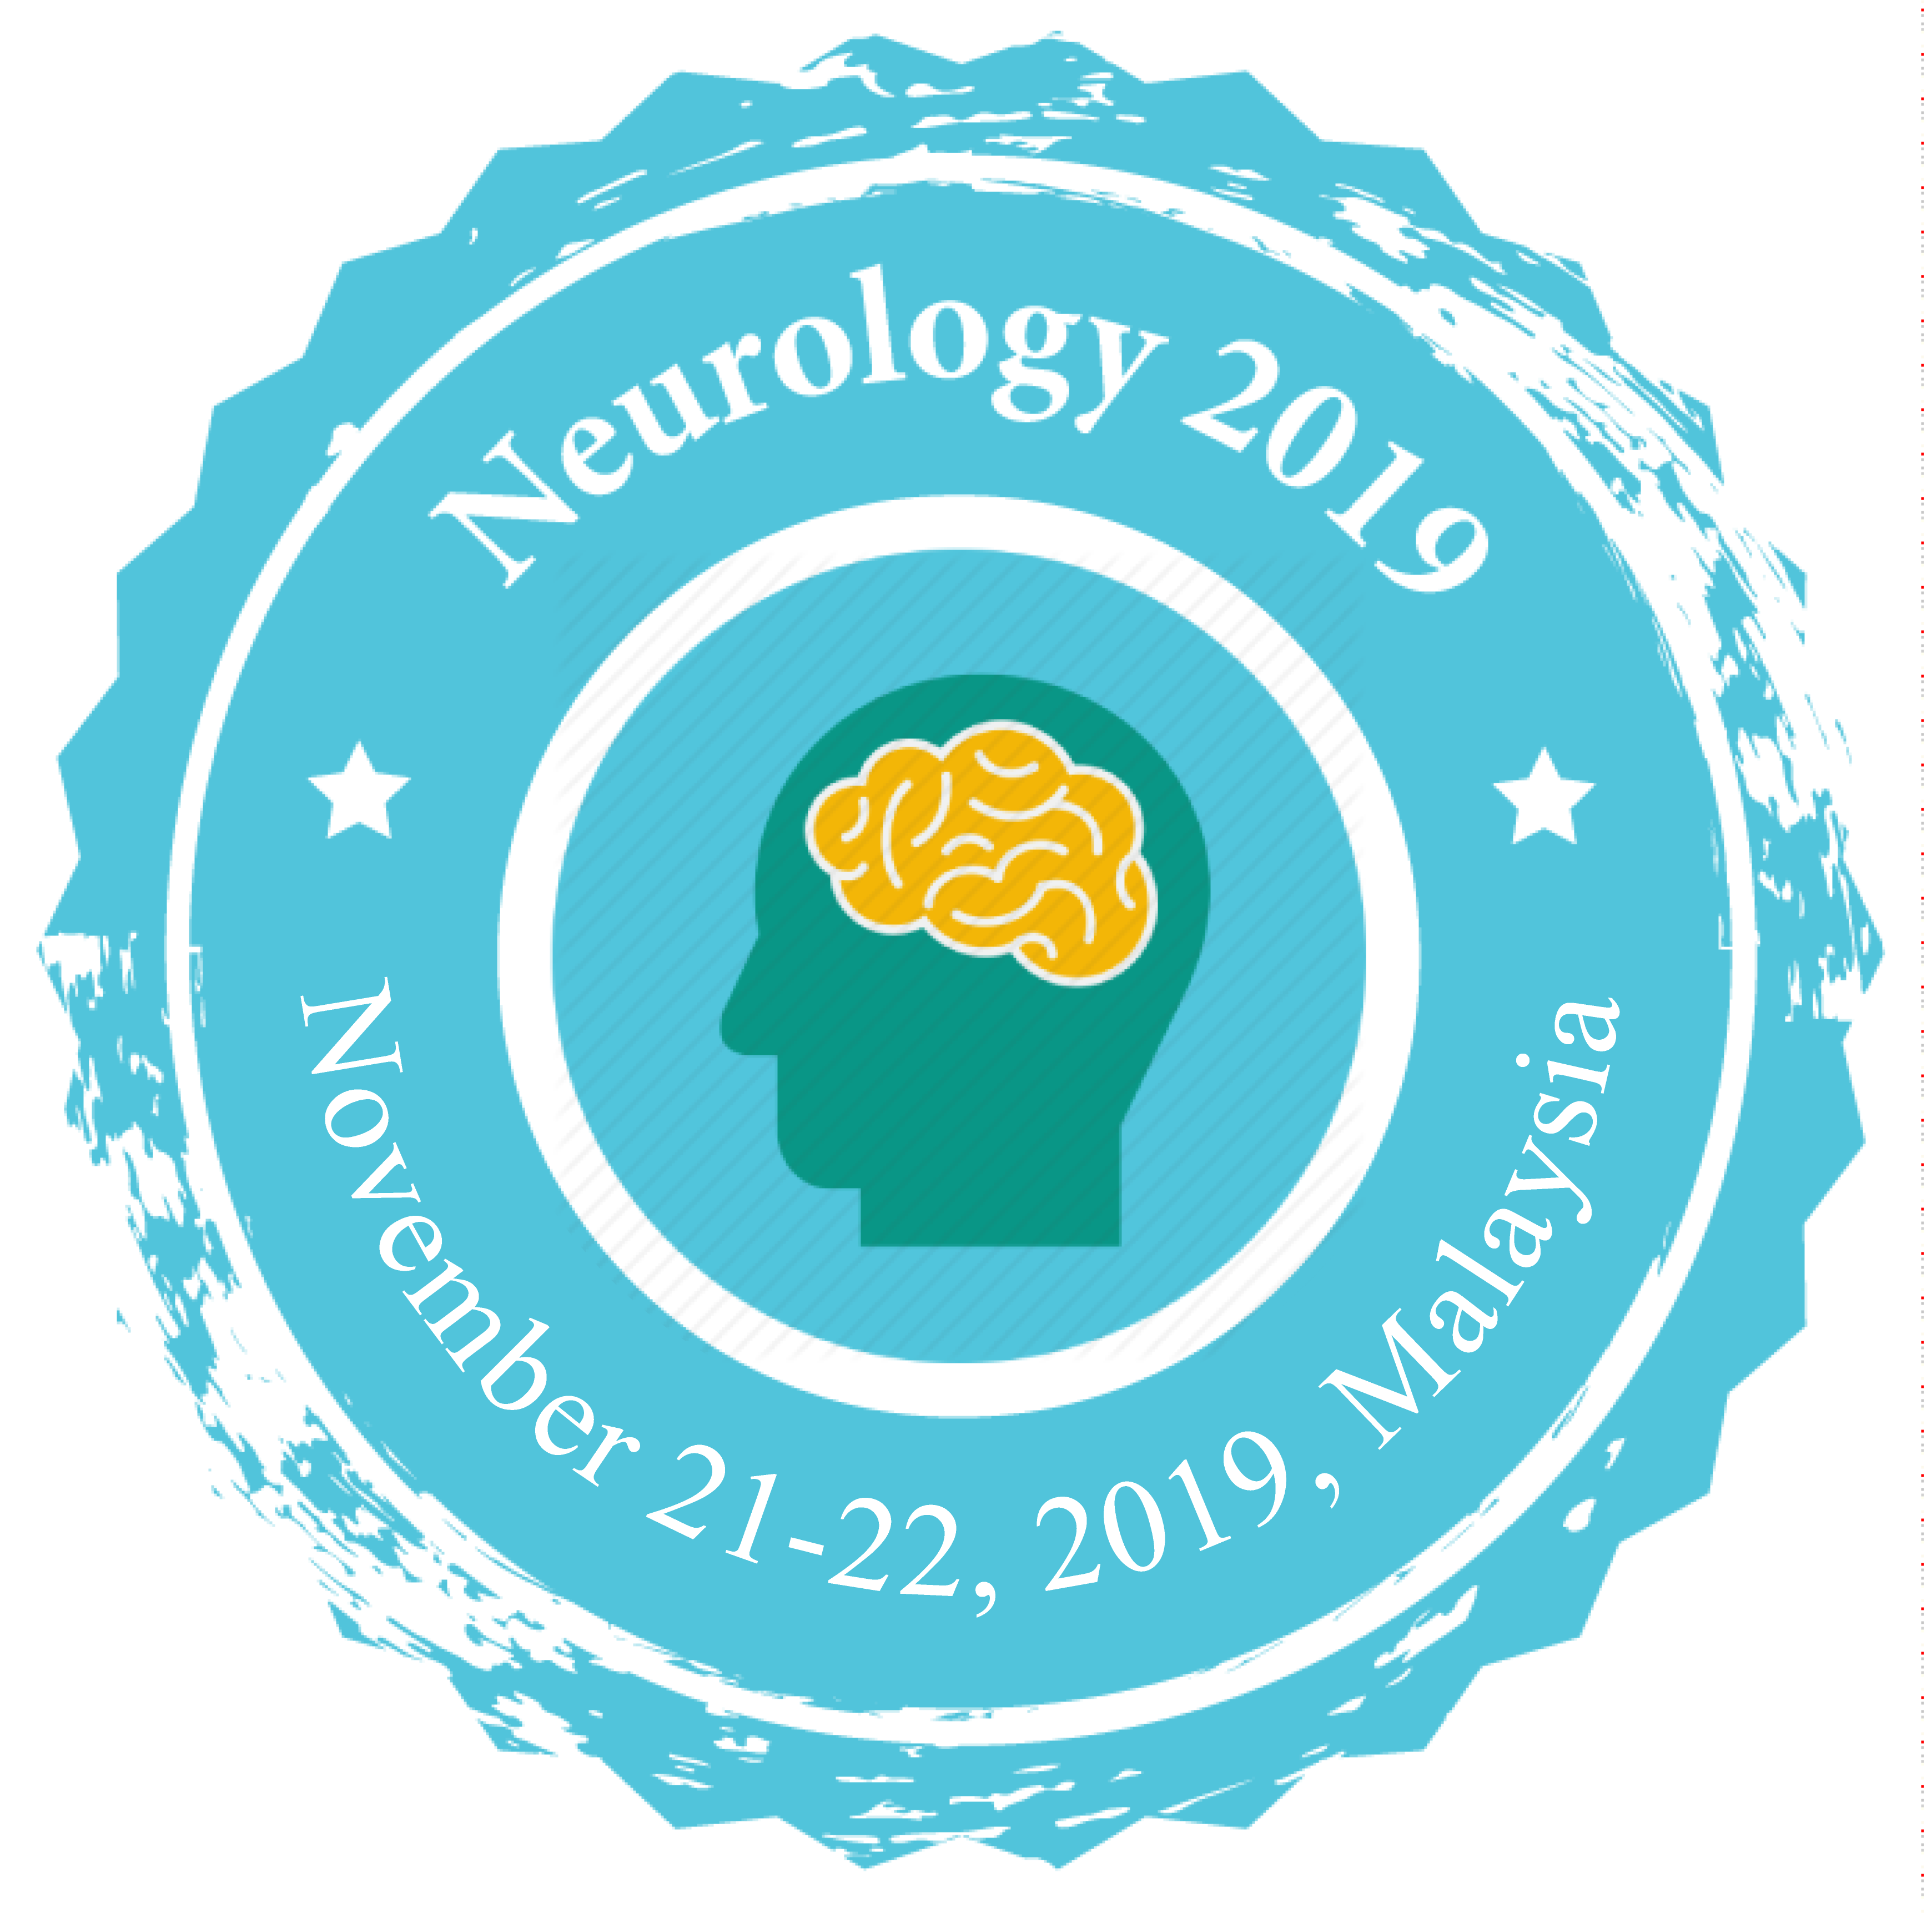 World Congress on Neurological and Psychiatric Disorders